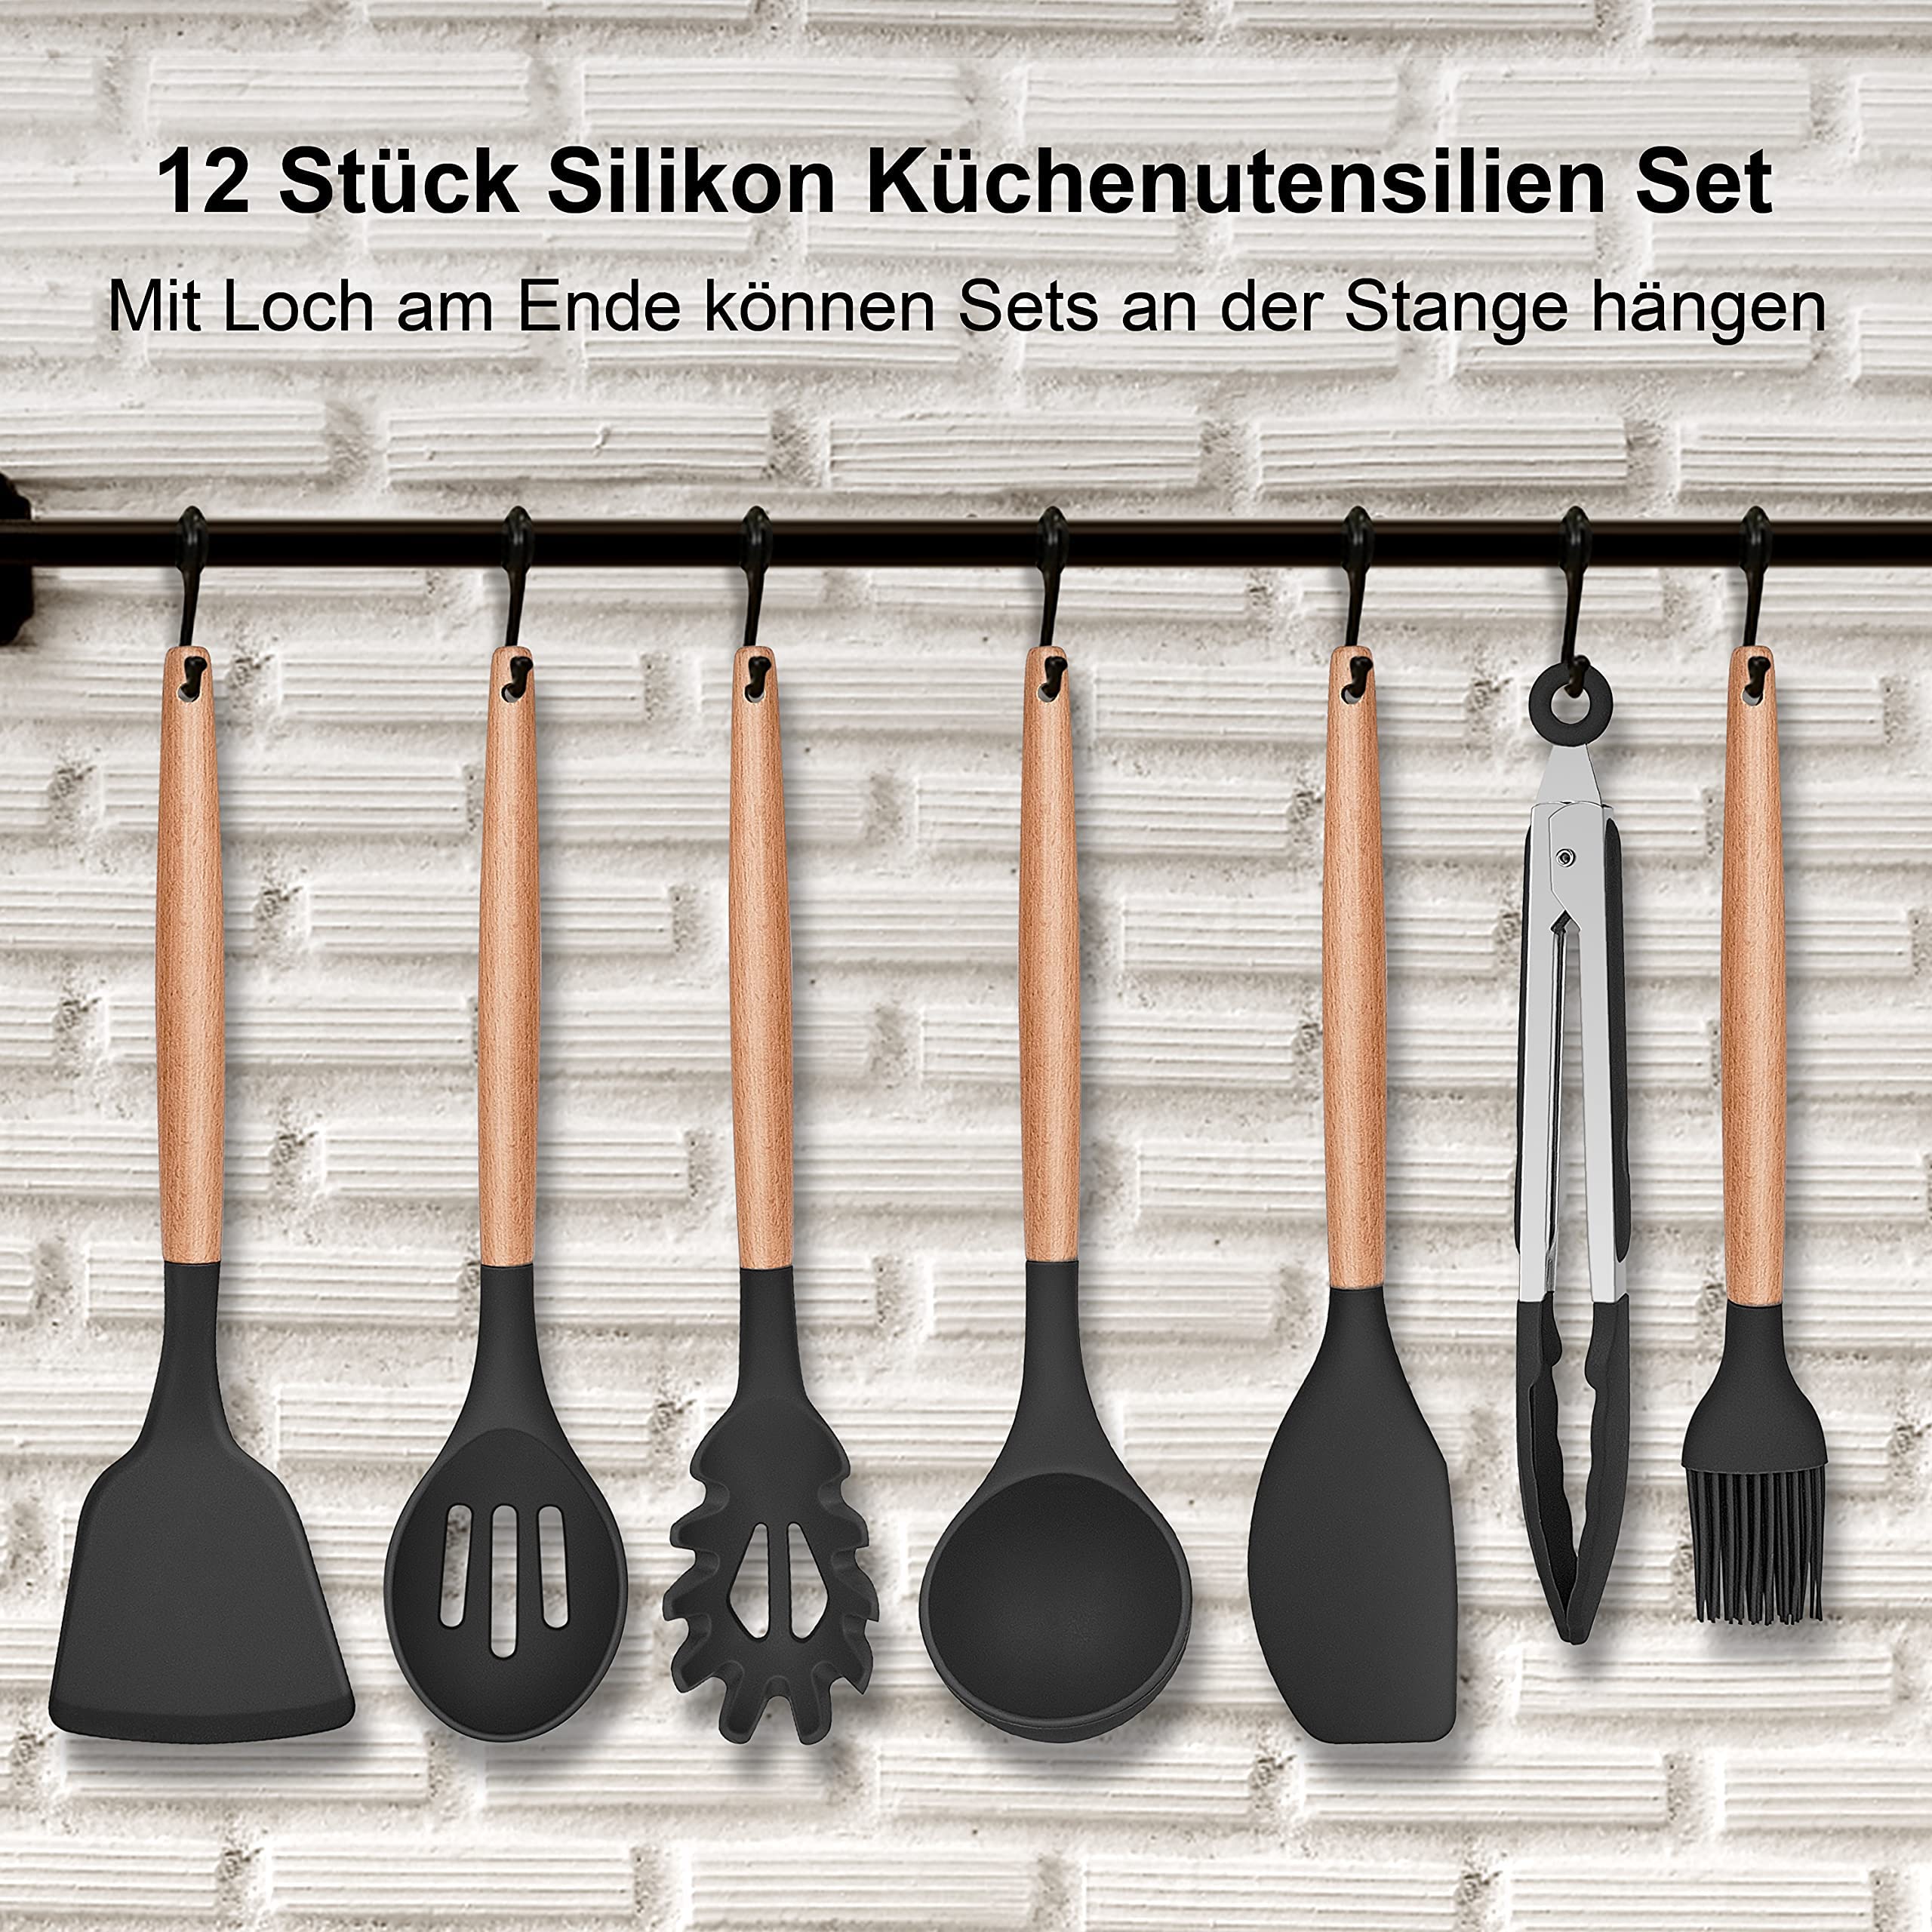 VIO Kitchen Utensil Set,12 Piece Cooking Utensils Set, Heat Resistant Cookware Set with Wooden Handle, Non-Stick Kitchen Utensils, Kitchen Set with Holder, Spatula Set with Spatula Tongs (BLACK)